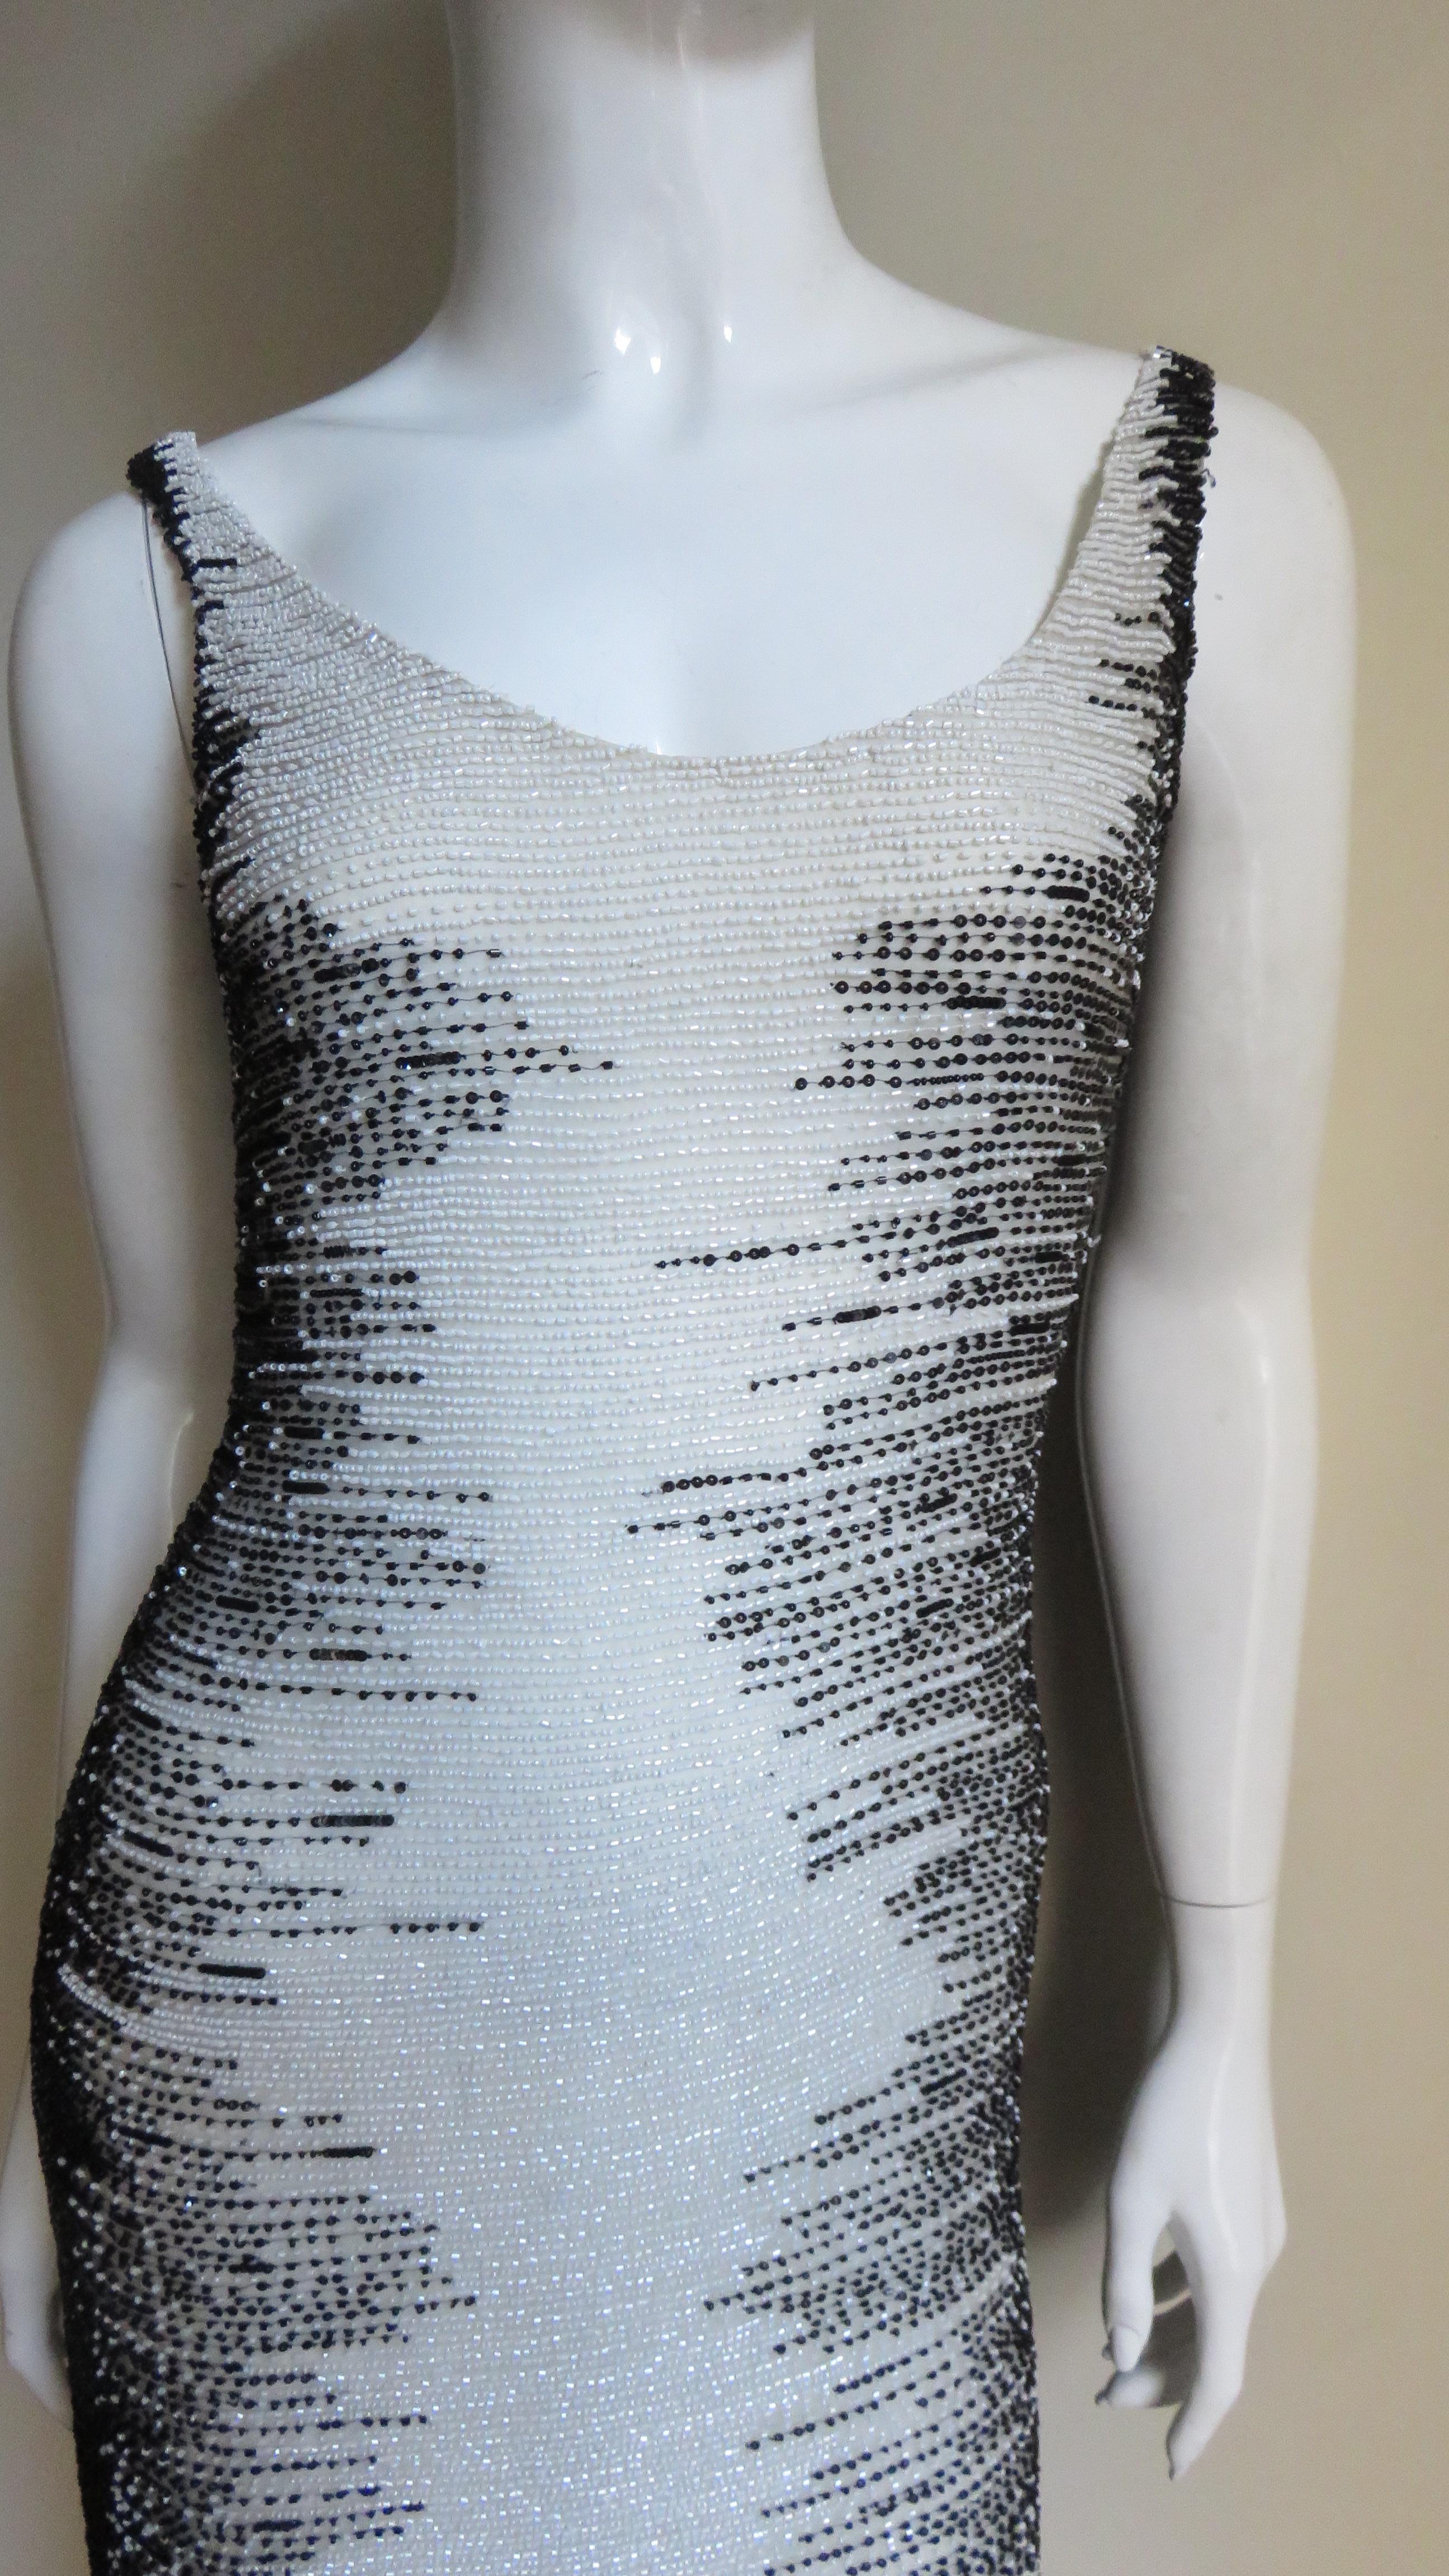 A fabulous off white silk dress completely covered in black and white glass beads from Valentino Boutique.  It is sleeveless with a scoop neckline front and back, skims the body and is completely covered in horizontal rows of white fine glass beads